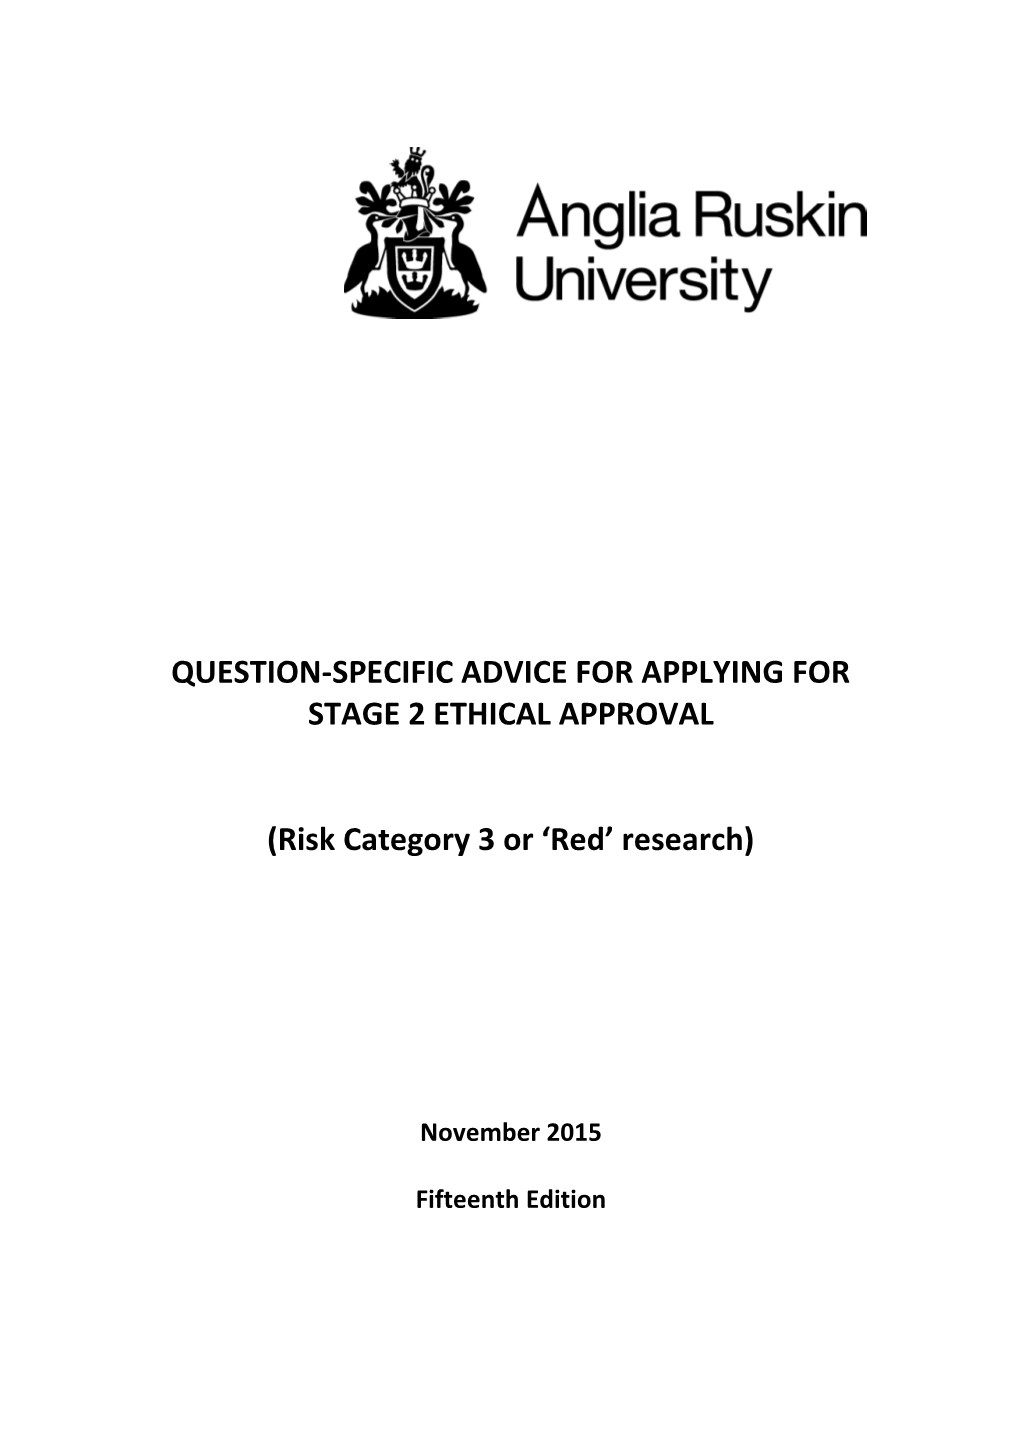 Question-Specific Advice for Applying for Stage 2 Ethical Approval